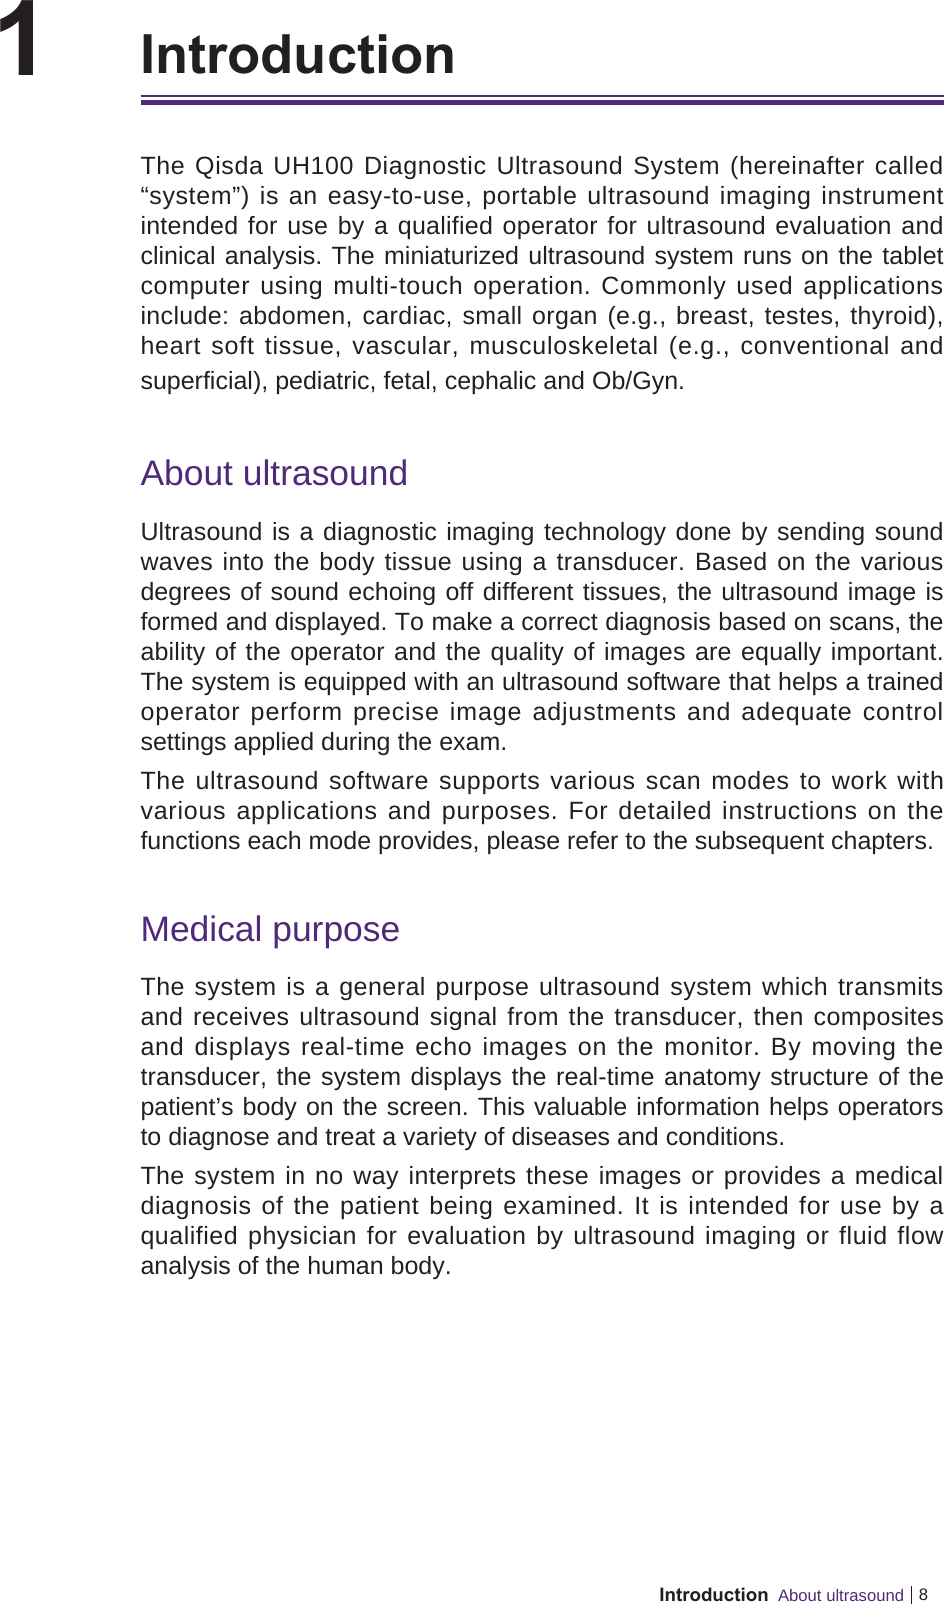 8Introduction  About ultrasound1    IntroductionThe Qisda UH100 Diagnostic Ultrasound System (hereinafter called “system”) is an easy-to-use, portable ultrasound imaging instrument intended for use by a qualified operator for ultrasound evaluation and clinical analysis. The miniaturized ultrasound system runs on the tablet computer using multi-touch operation. Commonly used applications include: abdomen, cardiac, small organ (e.g., breast, testes, thyroid), heart soft tissue, vascular, musculoskeletal (e.g., conventional and superficial), pediatric, fetal, cephalic and Ob/Gyn.About ultrasoundUltrasound is a diagnostic imaging technology done by sending sound waves into the body tissue using a transducer. Based on the various degrees of sound echoing off different tissues, the ultrasound image is formed and displayed. To make a correct diagnosis based on scans, the ability of the operator and the quality of images are equally important. The system is equipped with an ultrasound software that helps a trained operator perform precise image adjustments and adequate control settings applied during the exam.The ultrasound software supports various scan modes to work with various applications and purposes. For detailed instructions on the functions each mode provides, please refer to the subsequent chapters.Medical purposeThe system is a general purpose ultrasound system which transmits and receives ultrasound signal from the transducer, then composites and displays real-time echo images on the monitor. By moving the transducer, the system displays the real-time anatomy structure of the patient’s body on the screen. This valuable information helps operators to diagnose and treat a variety of diseases and conditions.The system in no way interprets these images or provides a medical diagnosis of the patient being examined. It is intended for use by a qualified physician for evaluation by ultrasound imaging or fluid flow analysis of the human body.